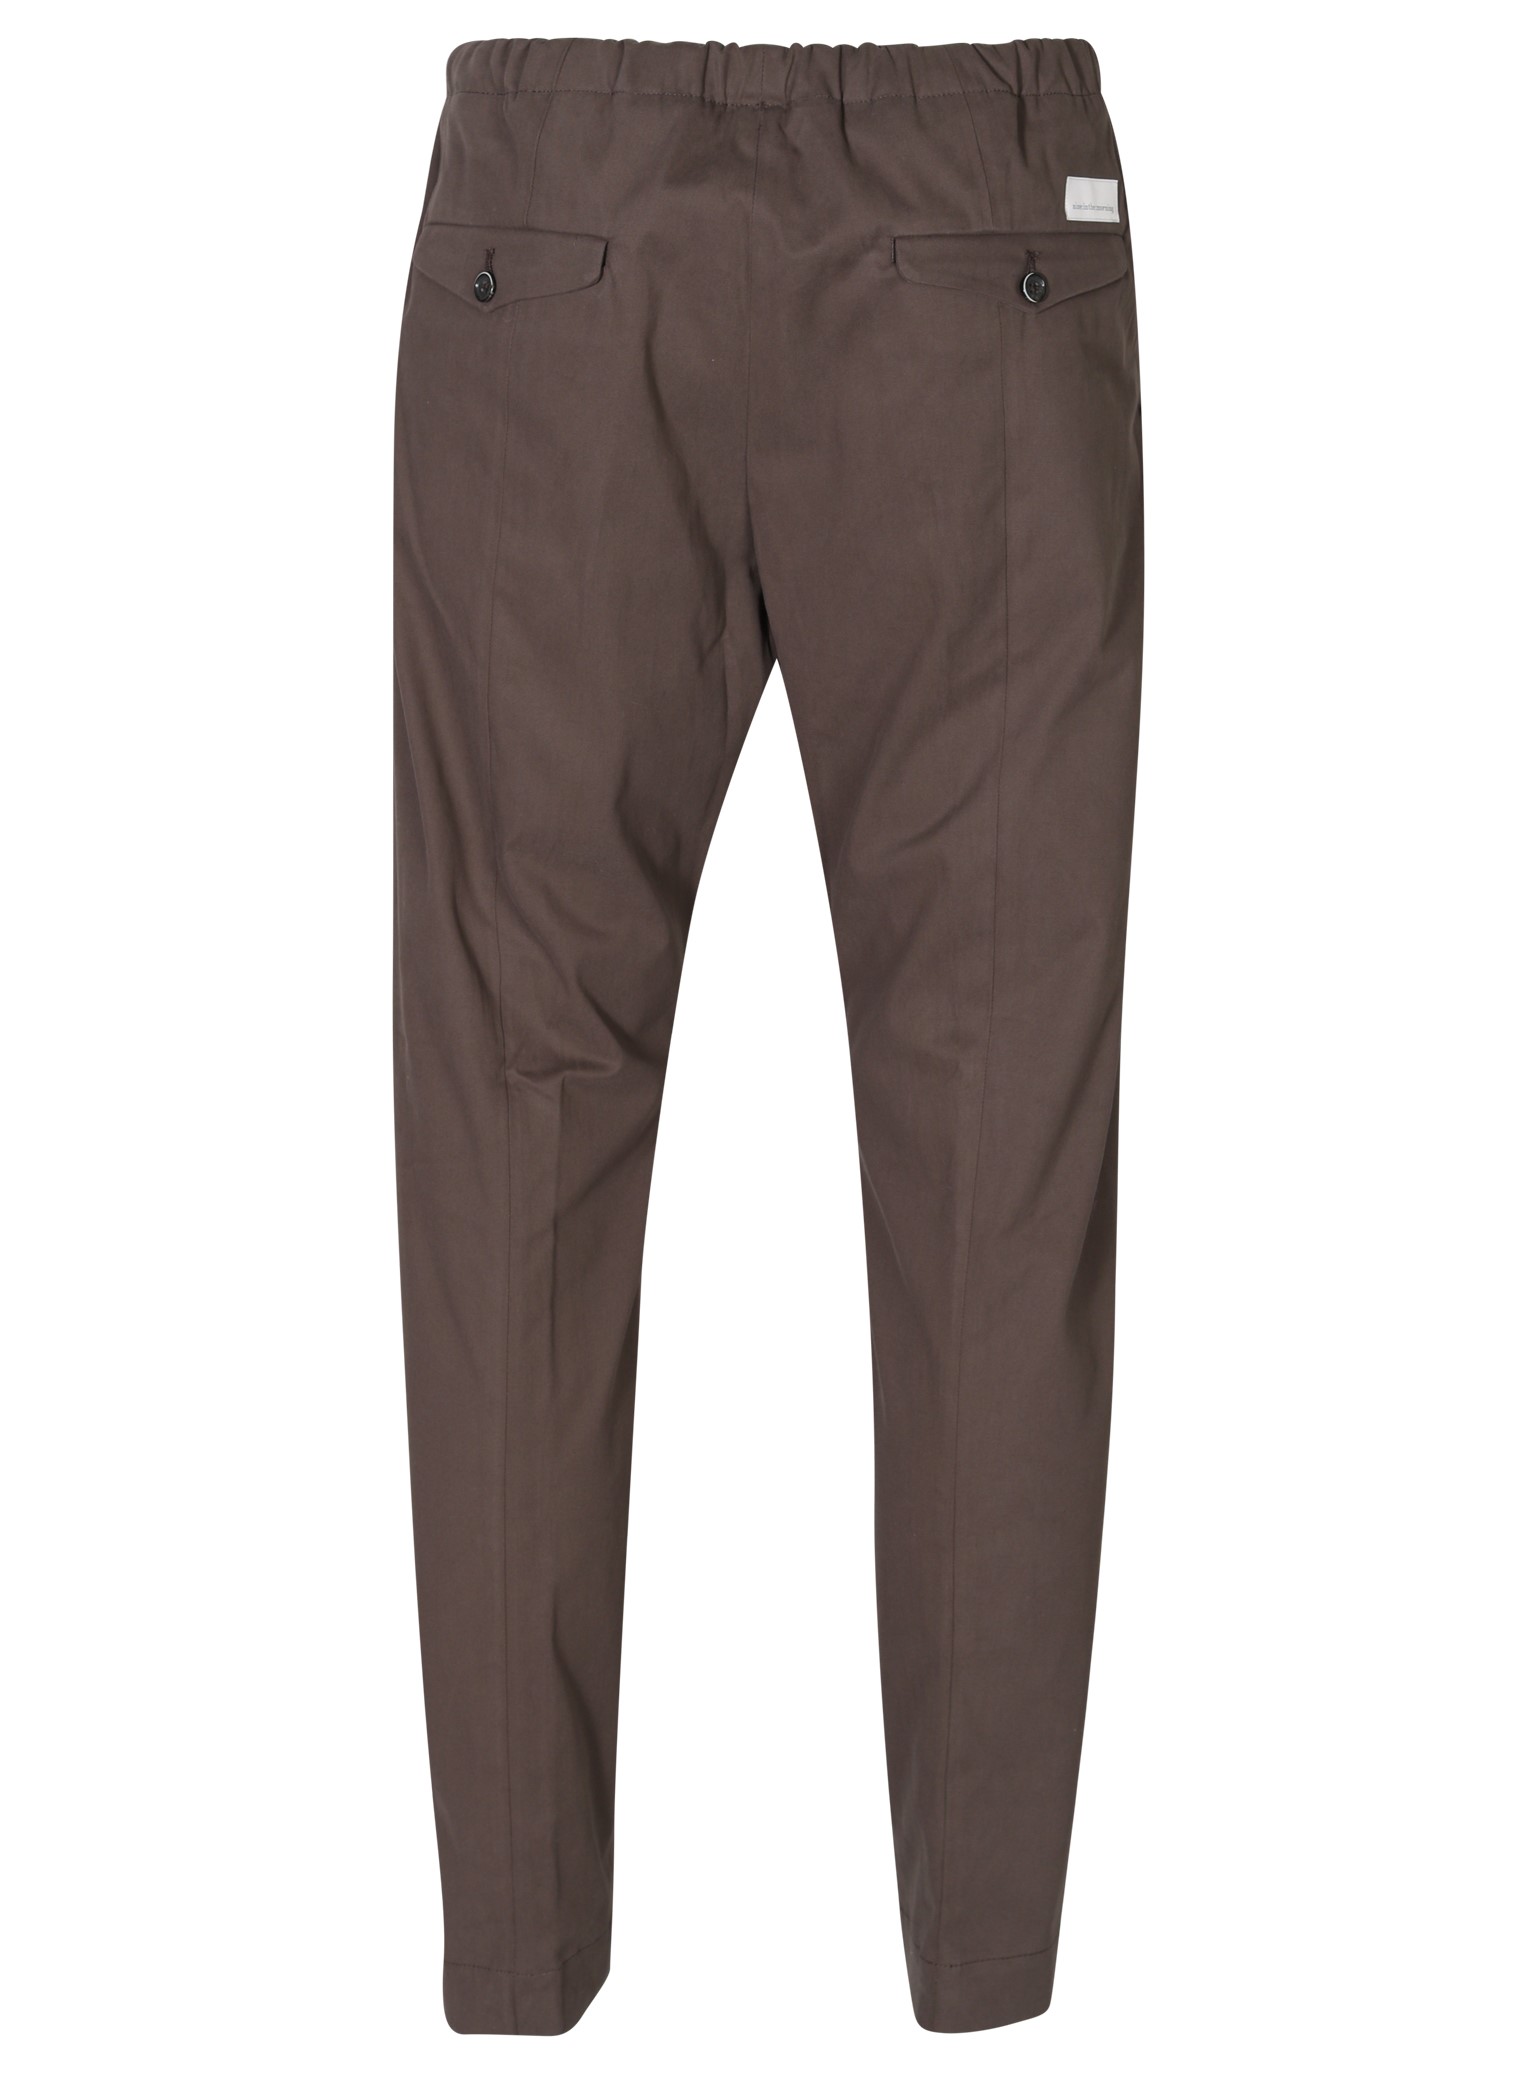 NINE:INTHE:MORNING Mirco Carrot Cotton Stretch Pant in Brown 46